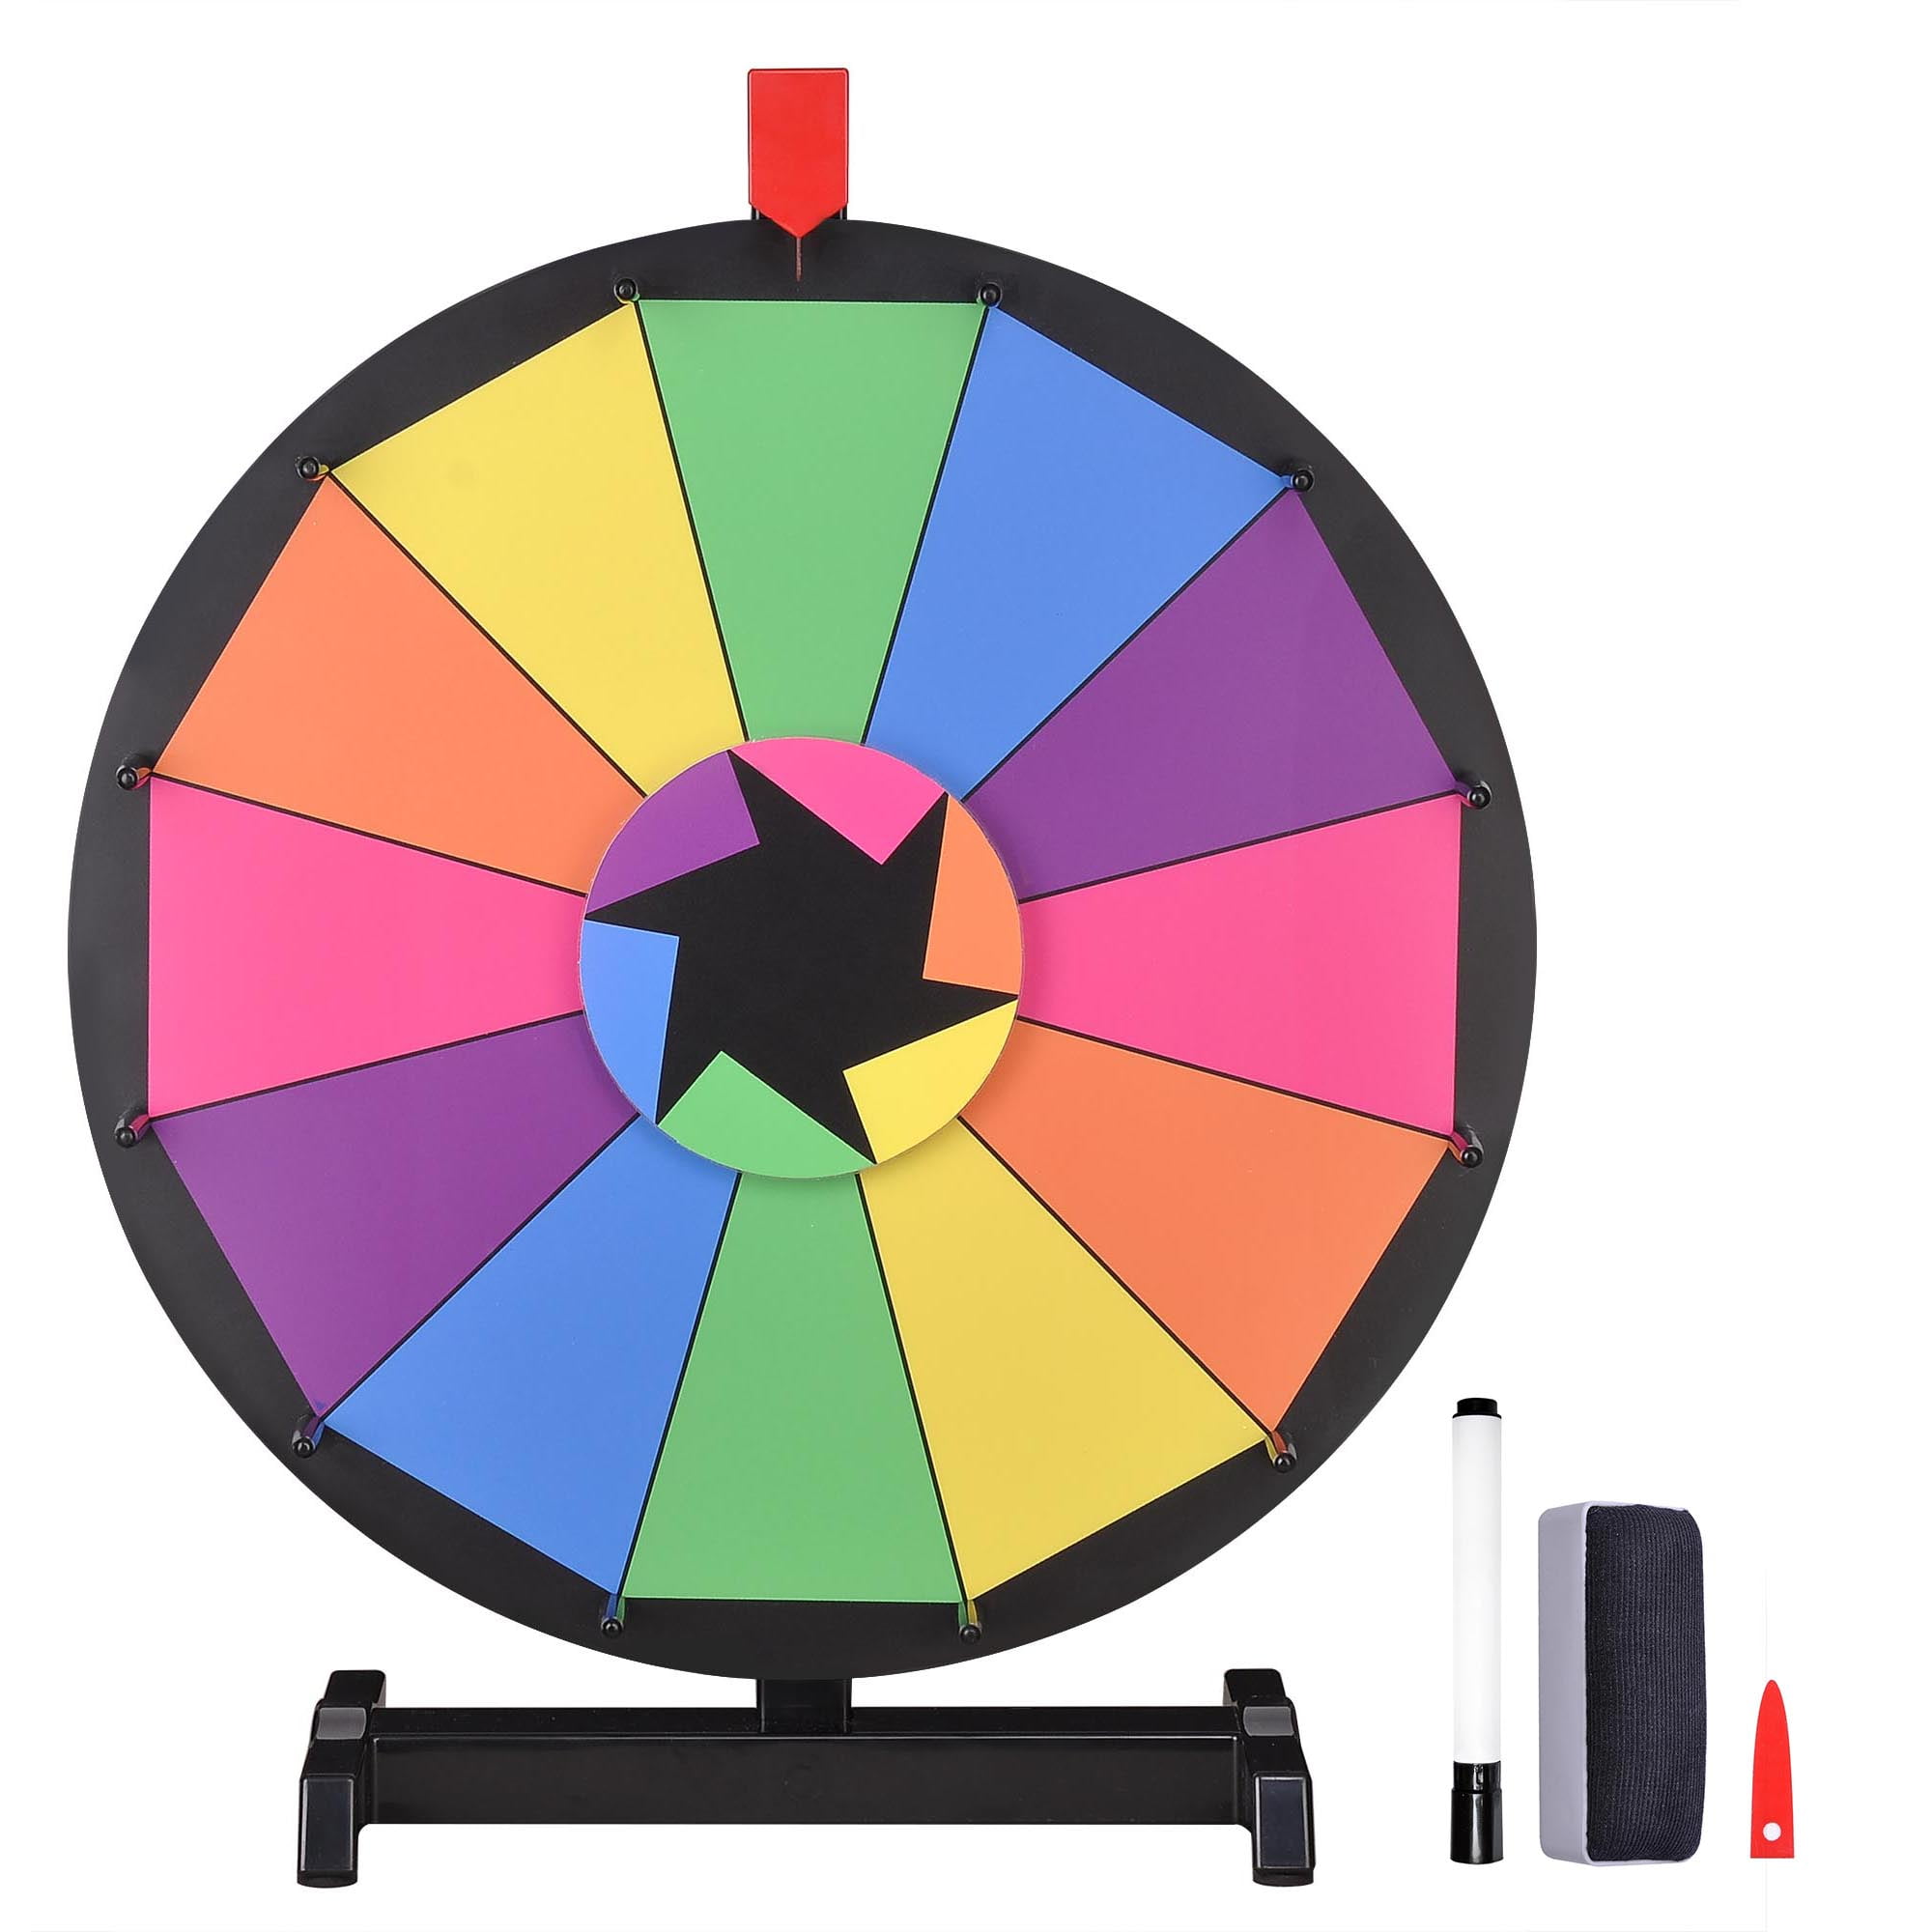 WinSpin 12 Inch Spinning Wheel of Fortune Game Dual Use Tabletop or Wall Mounted Spinning Wheel 12 Slots Decision Wheel